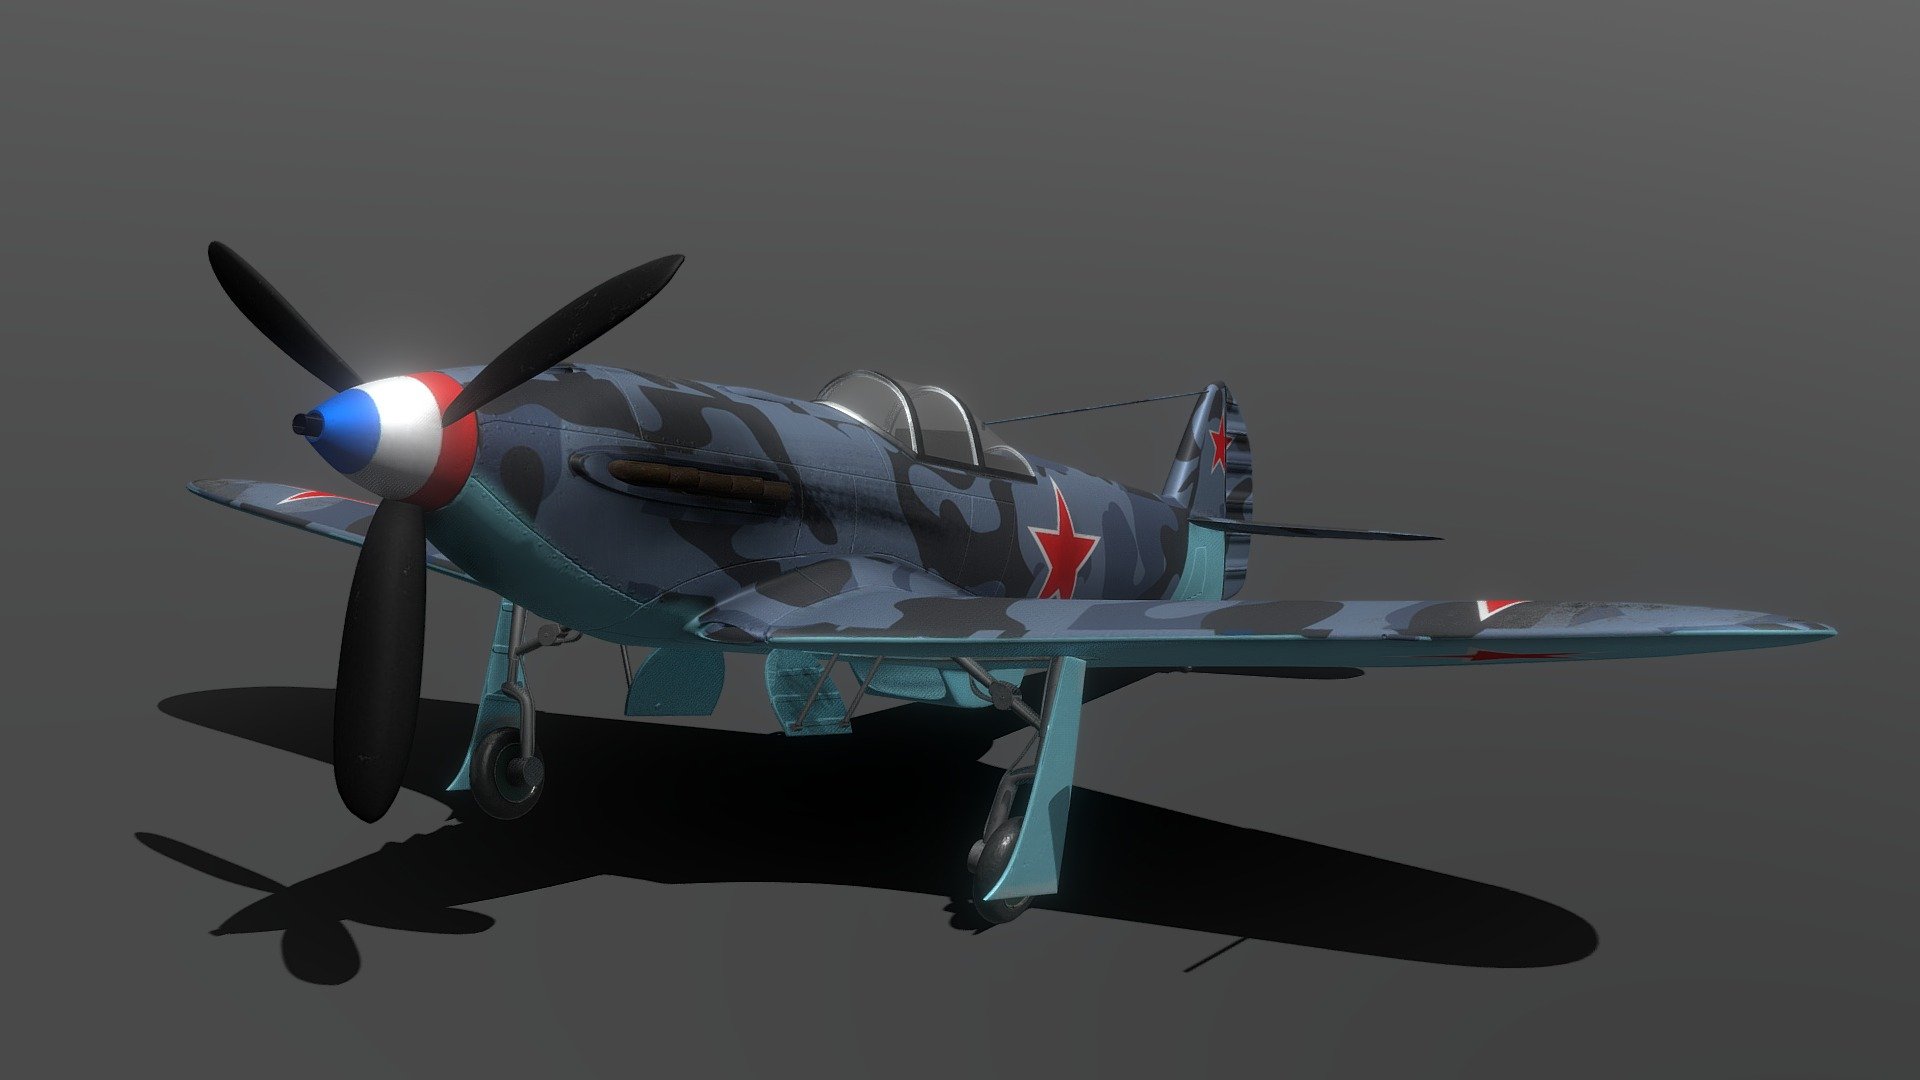 Yak 3 Yakovlev Modeled in Autodesk 3ds max.

Features:

The model has a physically correct measurements - accurate representation of the original object. Everything in the scene is intelligently named and well organized for easy and intuitive orientation in the scene. All geometry has been carefully checked for N-sided faces, flipped normals, overlapping vertices and others that may cause problems for texturing or rendering. Created to be used in a modern engine that supports physically based rendering (PBR) comes with textures optimized for Unreal Engine 4 and Unity.

If you like this model I would appreciate if you rate it.

Also check out my other models, just click on my user name to see complete gallery 3d model